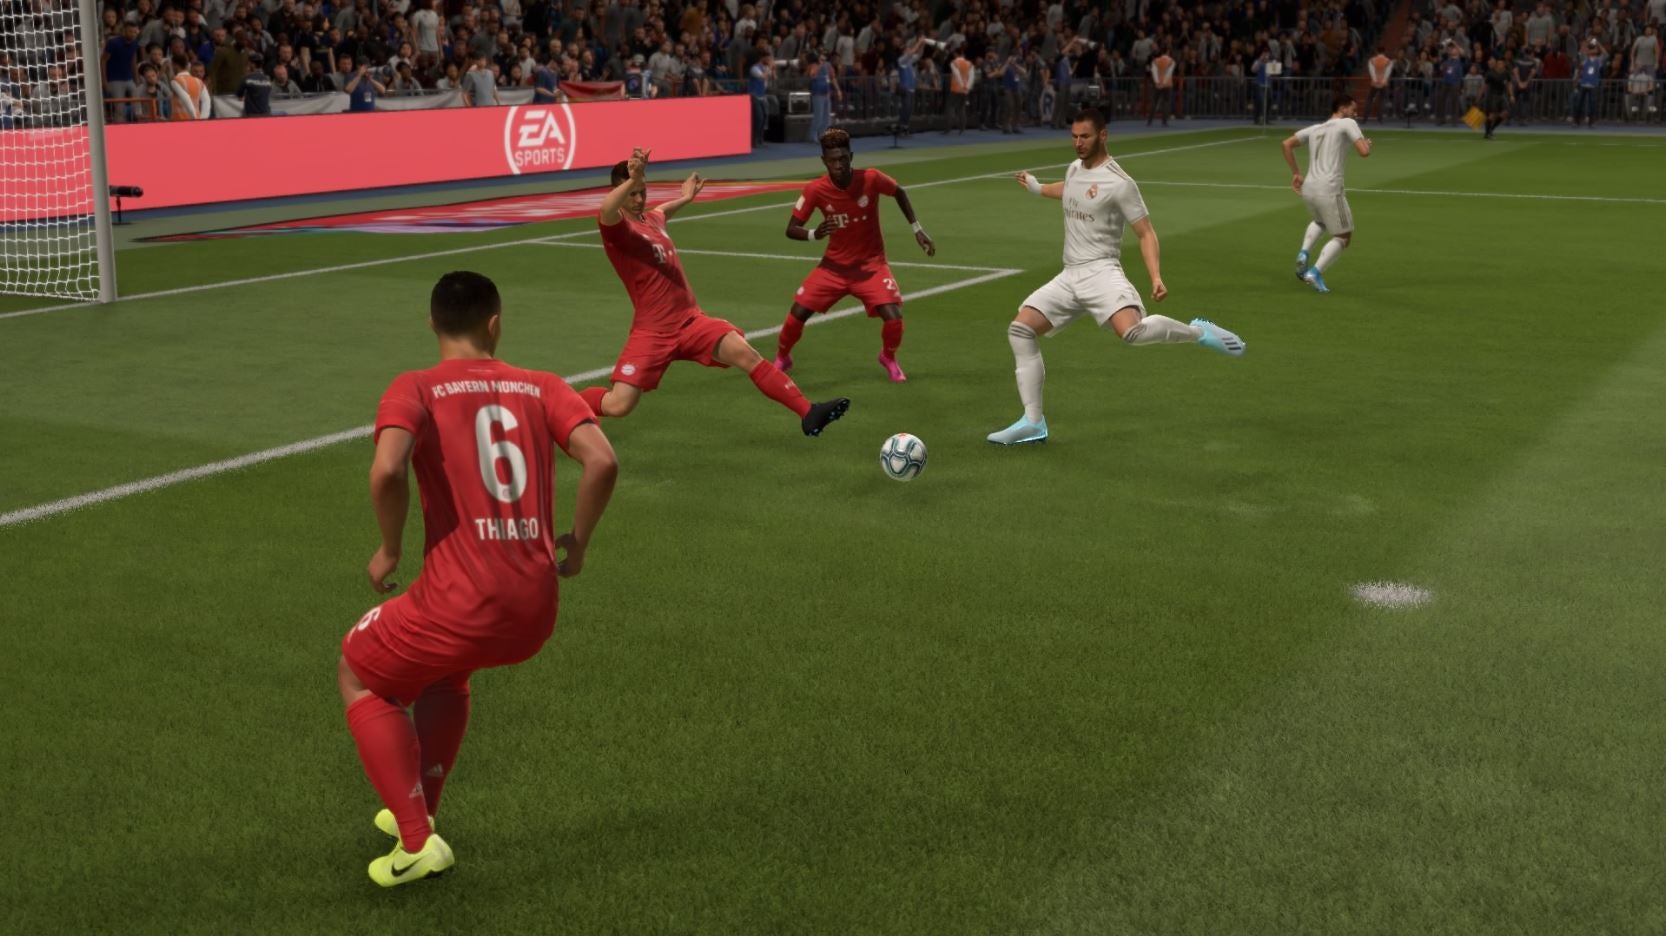 Image for EA Sports is creating fake crowds to make Premier League matches less sad to watch